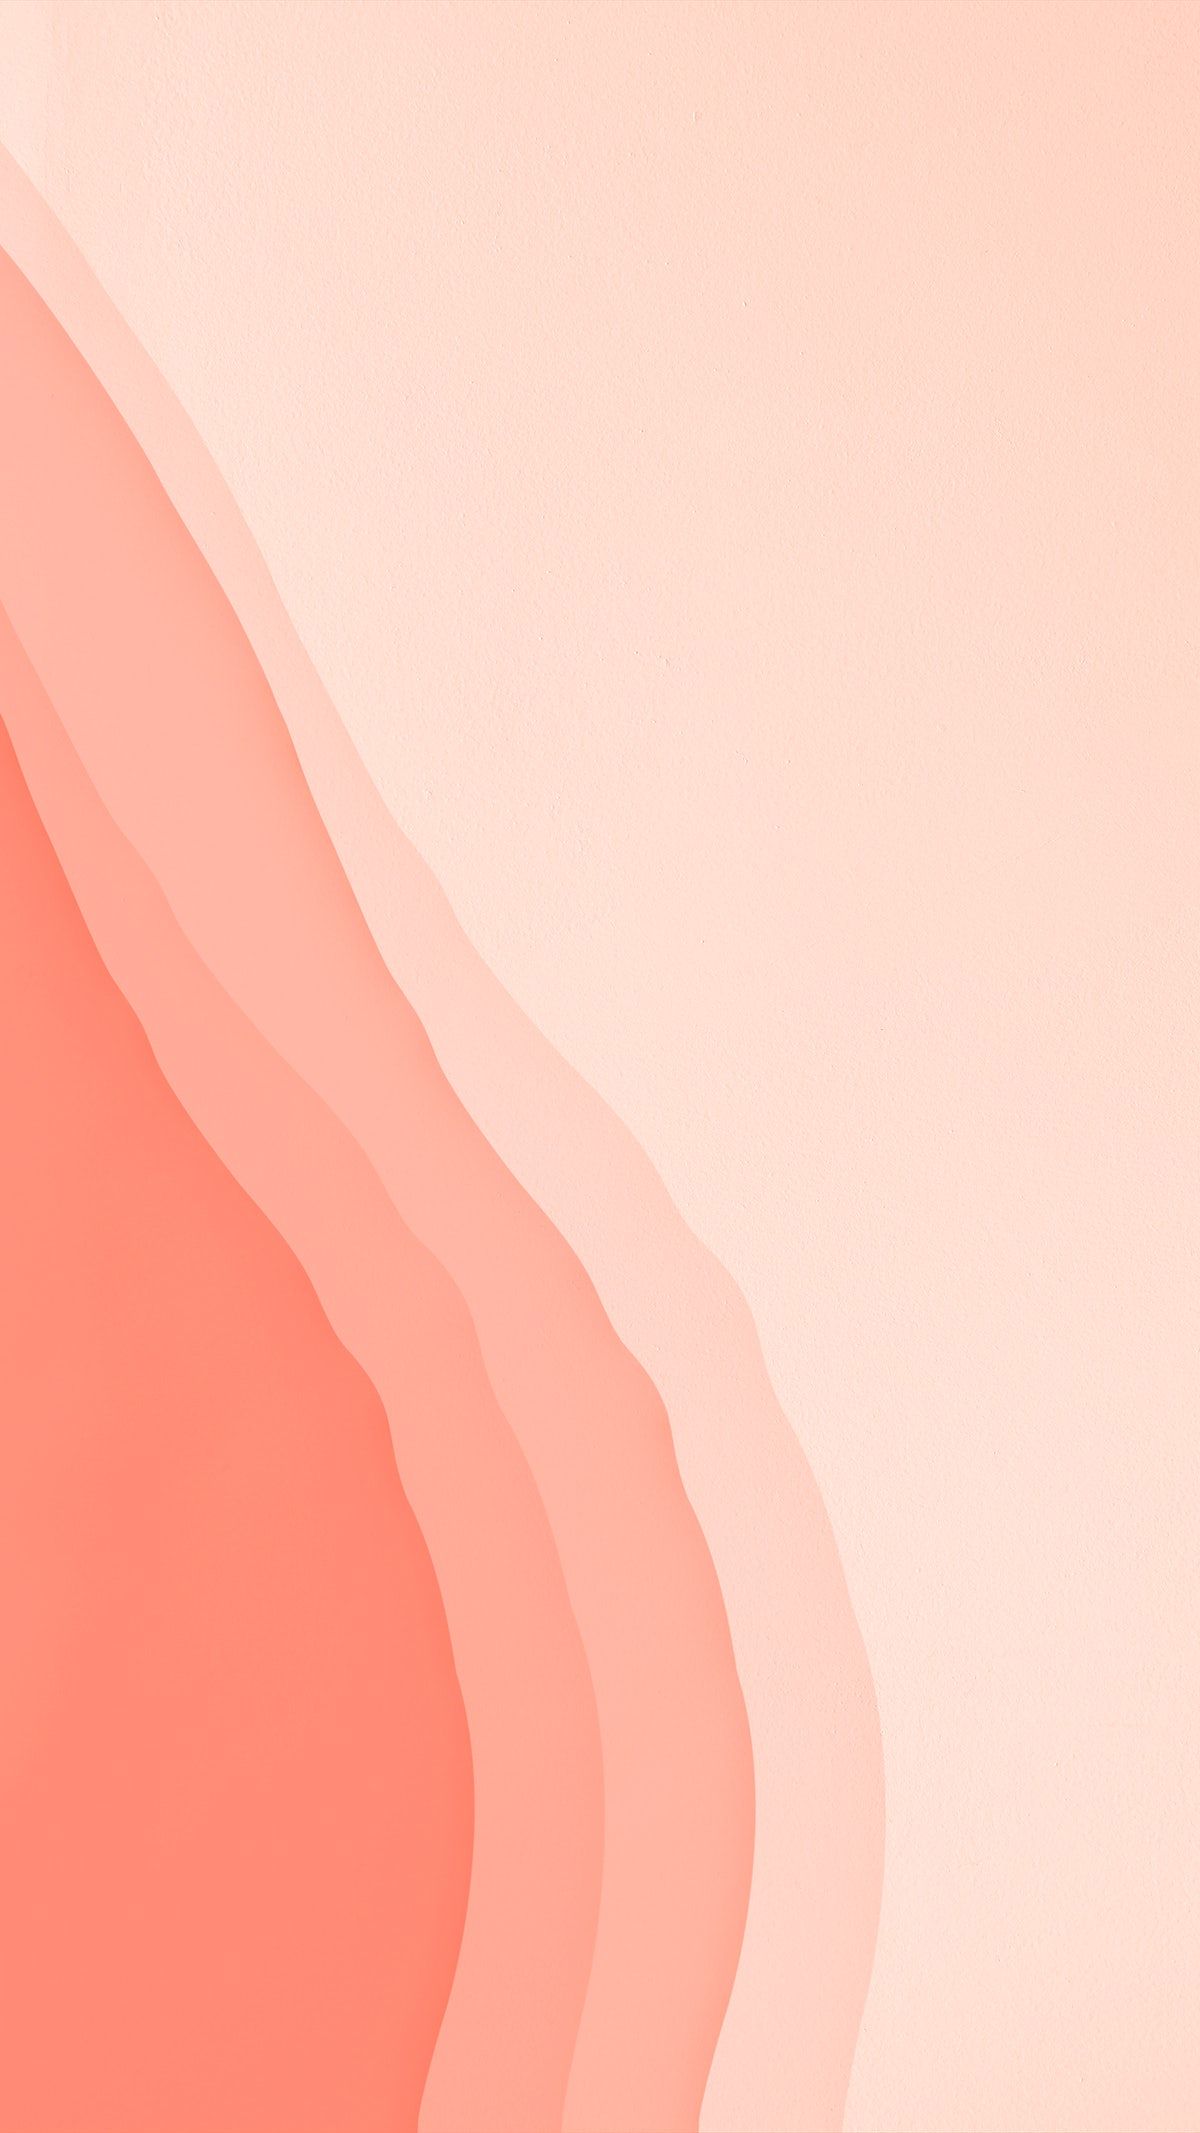 A pink and orange abstract painting - Coral